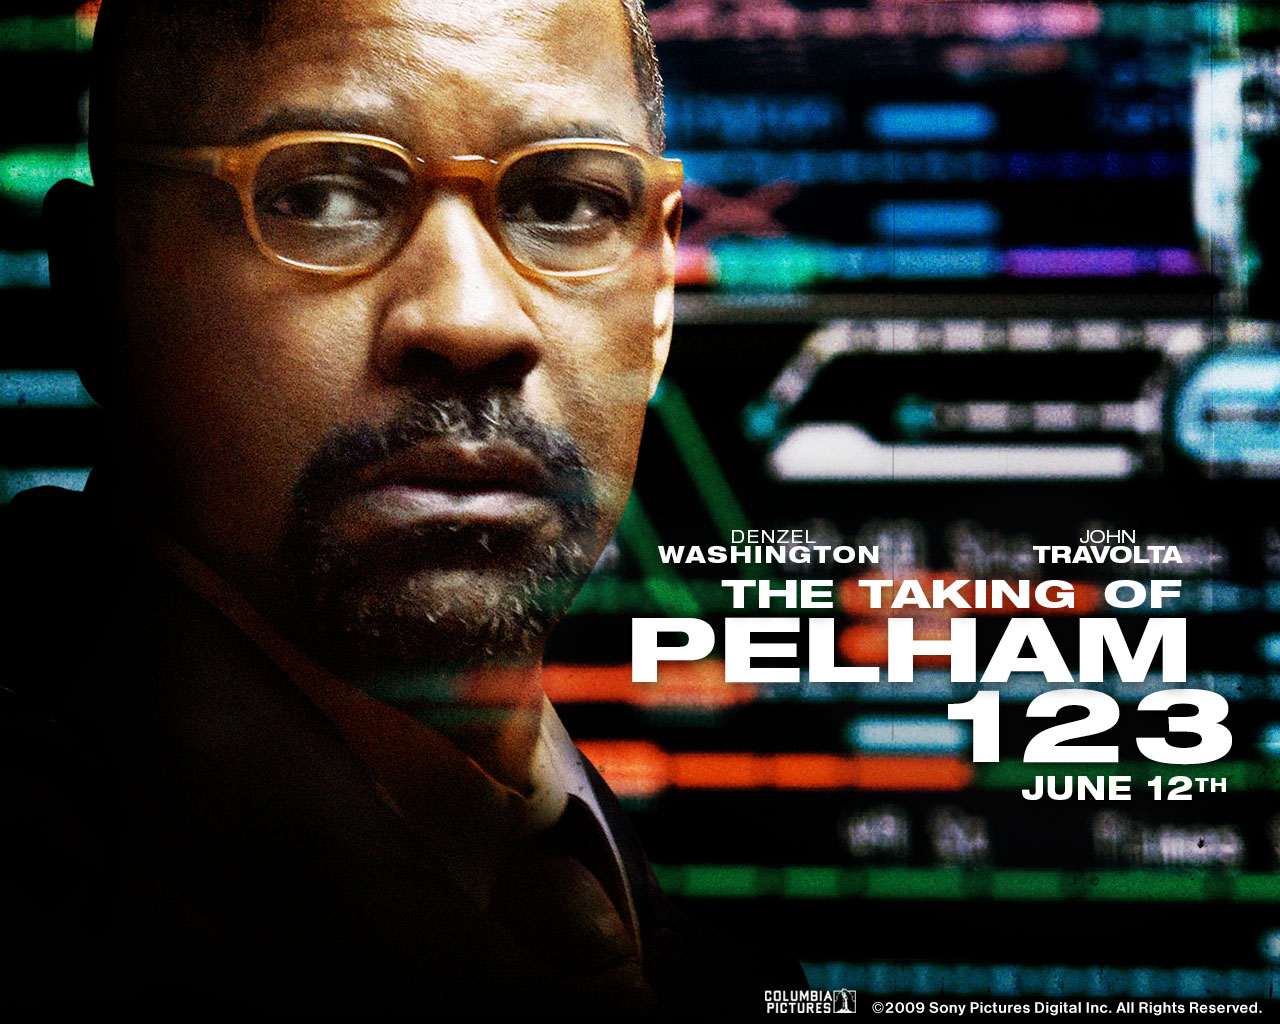 Download High quality The Taking of Pelham 1 2 3 wallpaper / Movies / 1280x1024